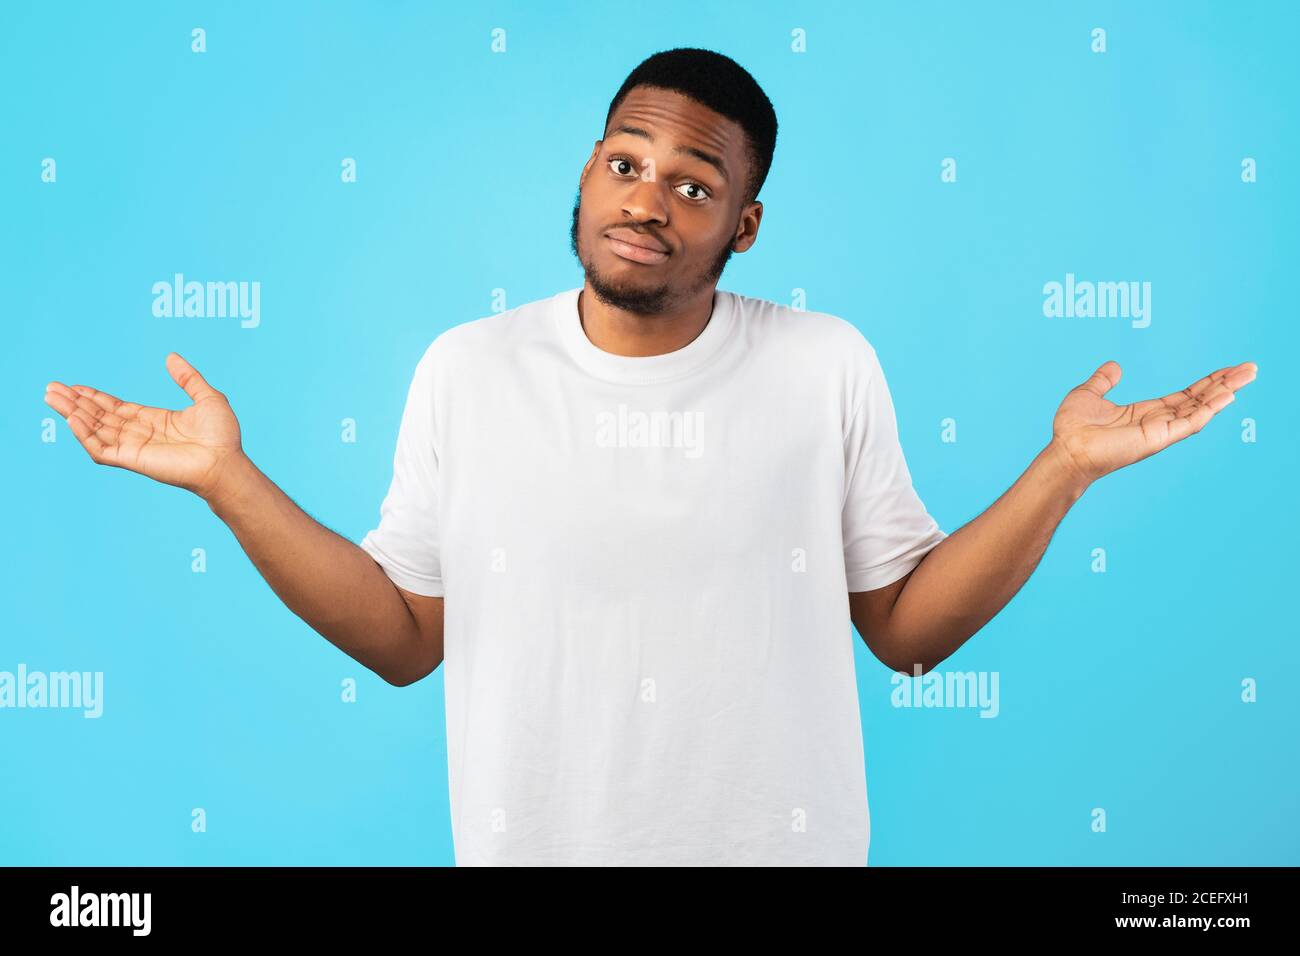 Young Black Man Shrugging Shoulders Posing Over Blue Background Stock Photo